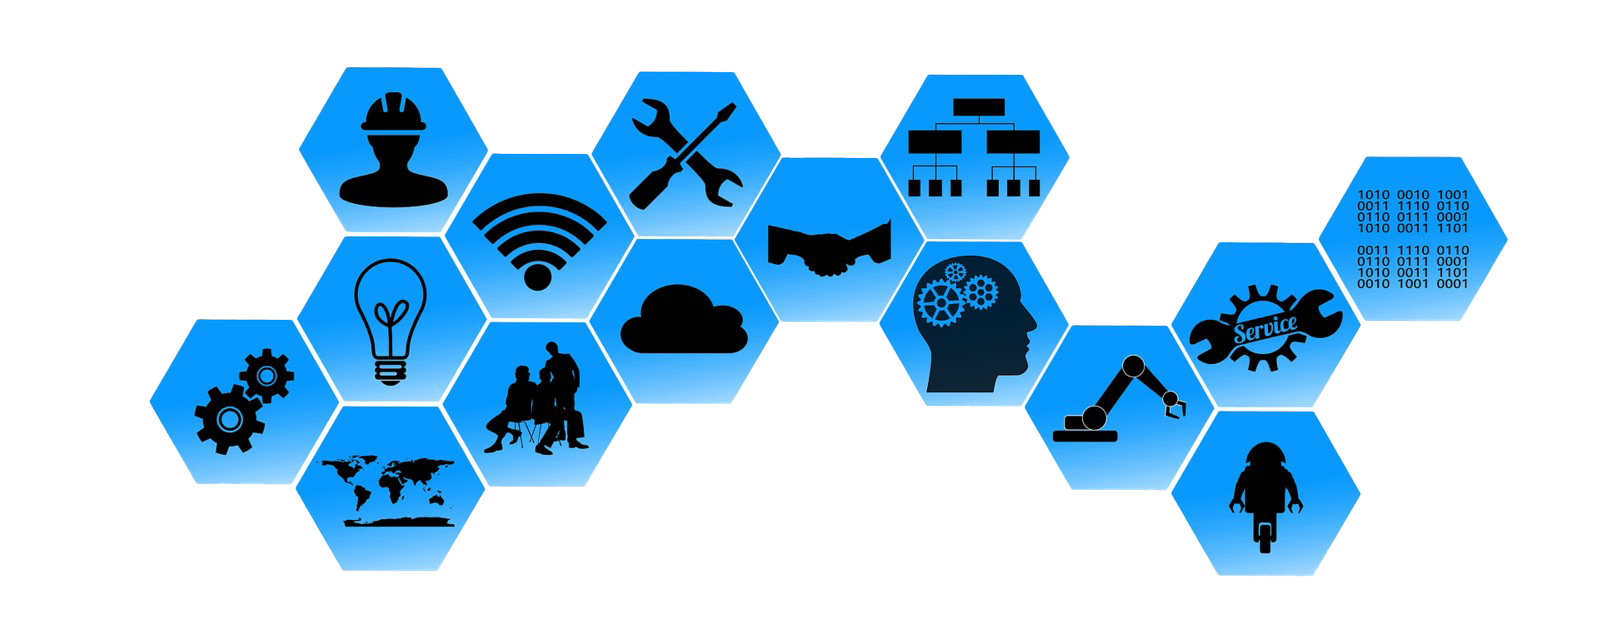 A Blue Hexagons With Icons